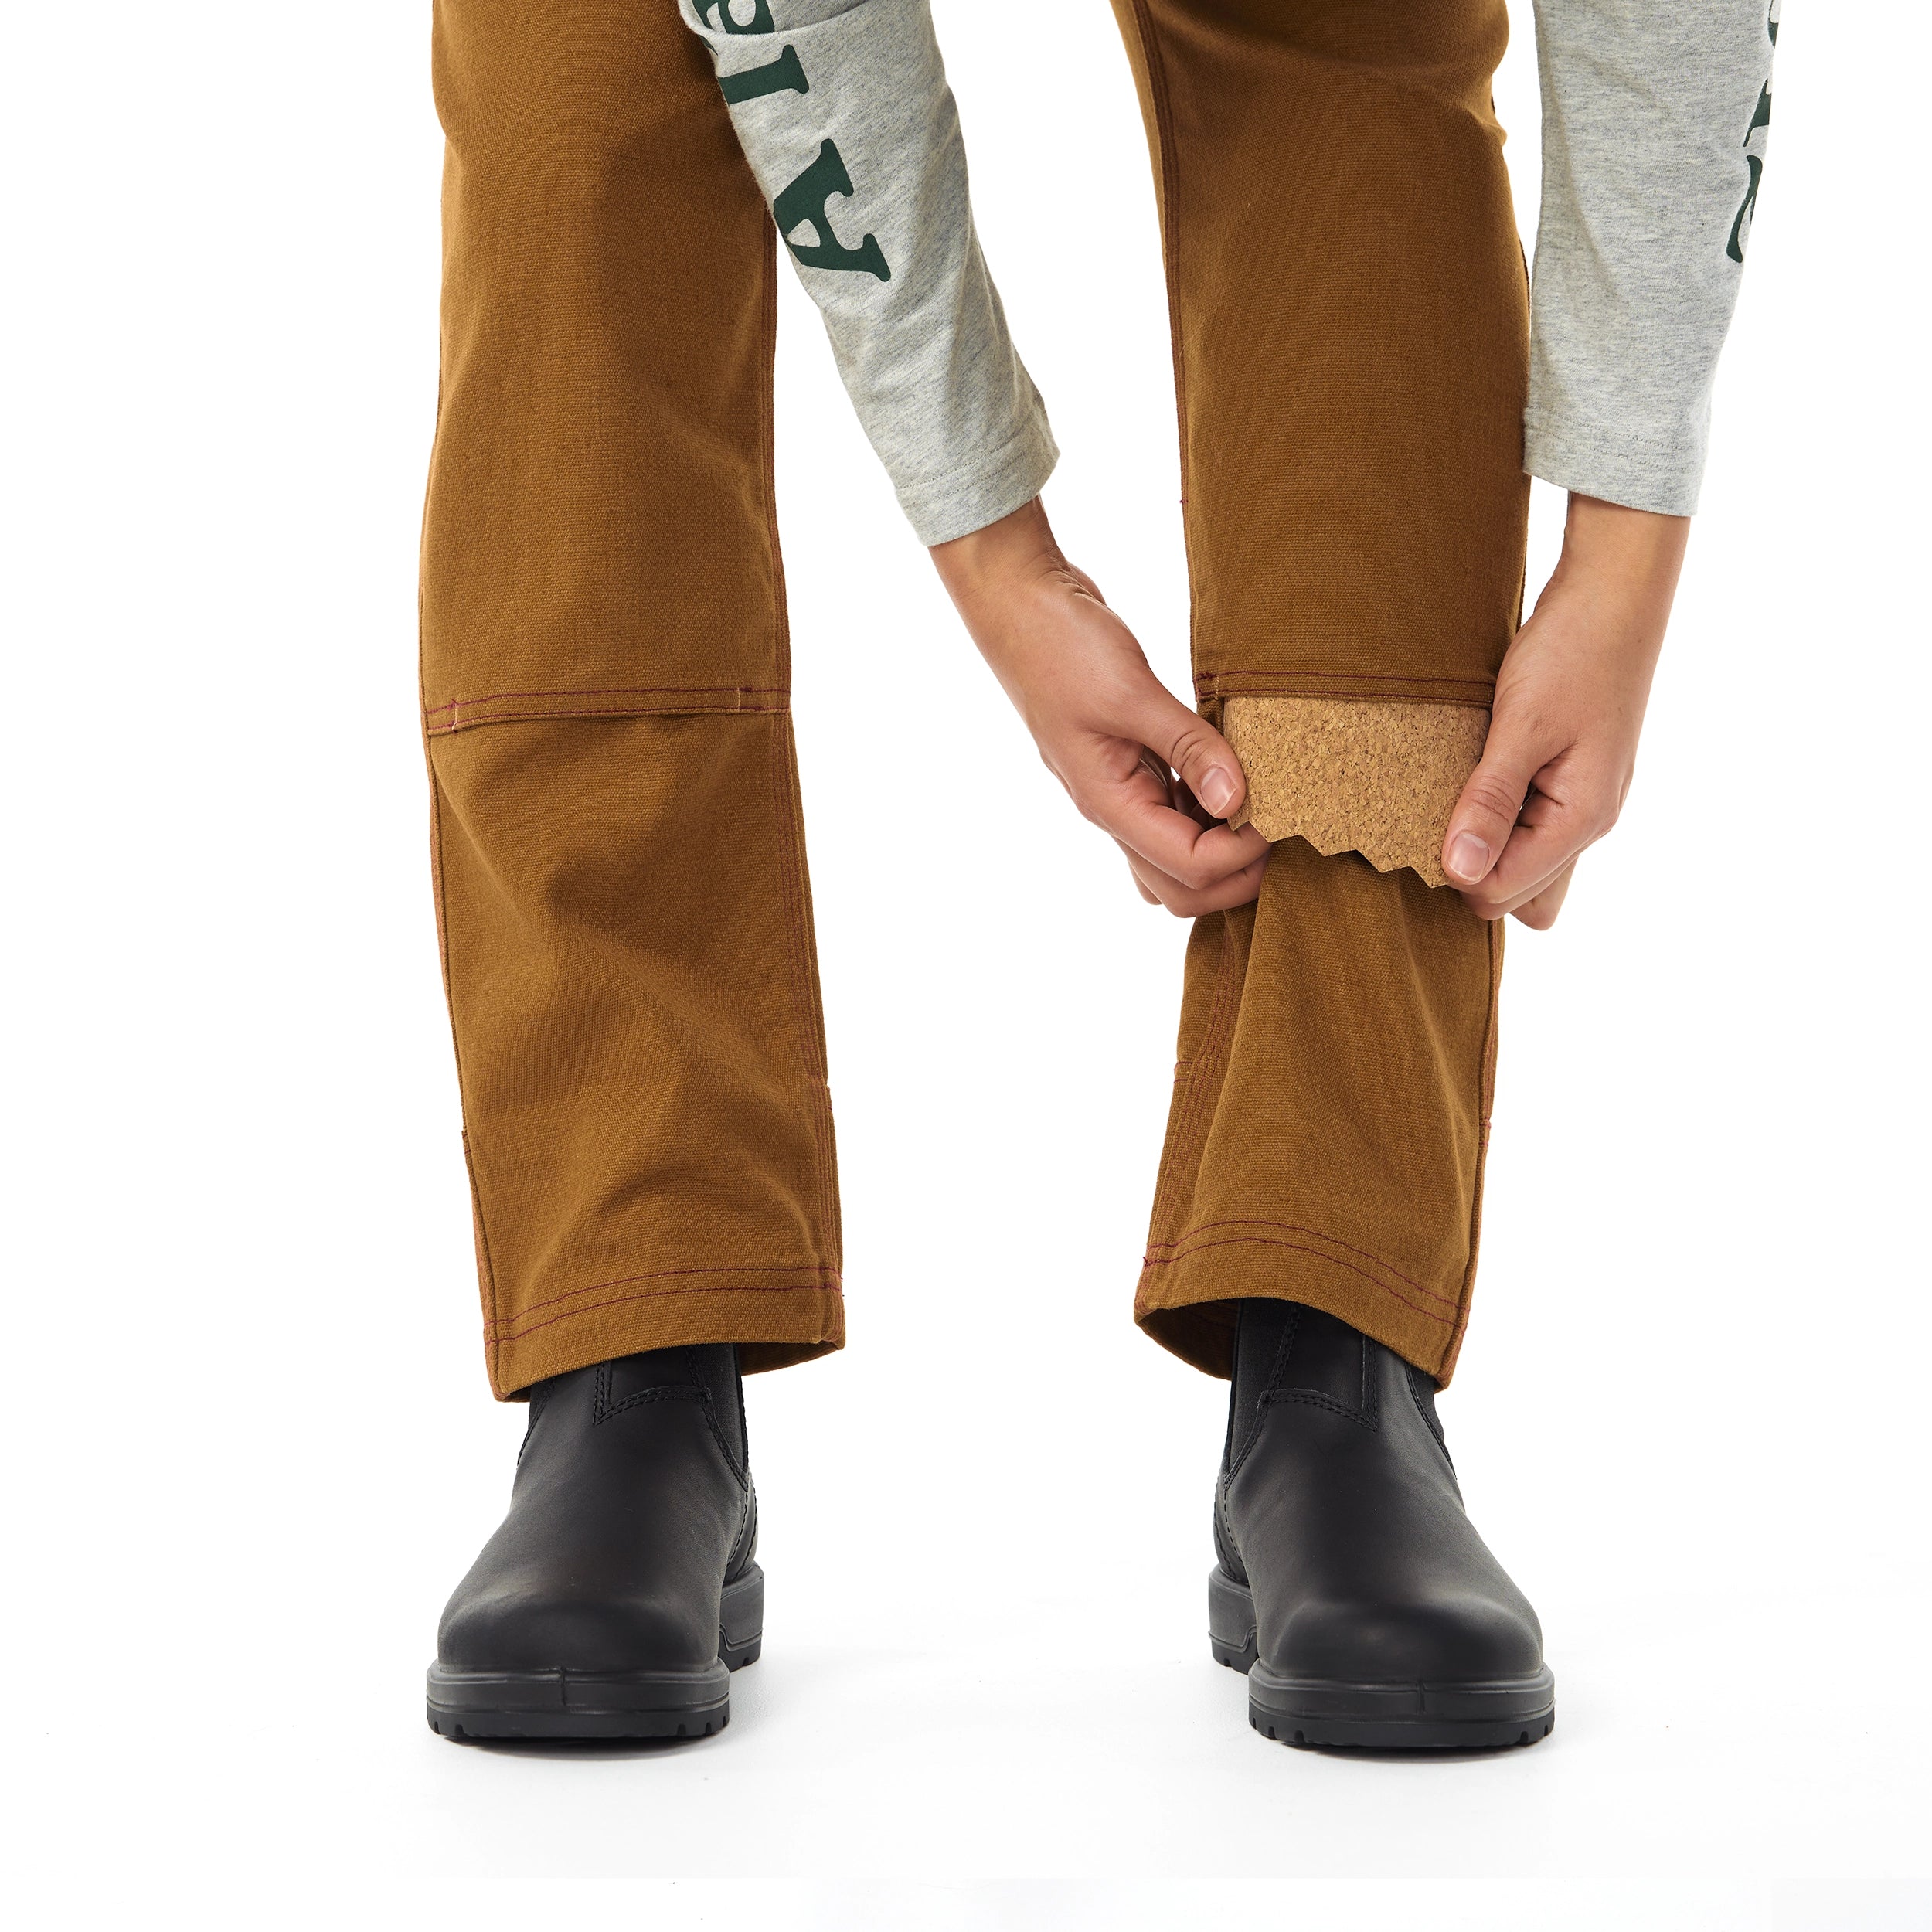 Comfortable Work Pants that are Trendy! - CanDesLand